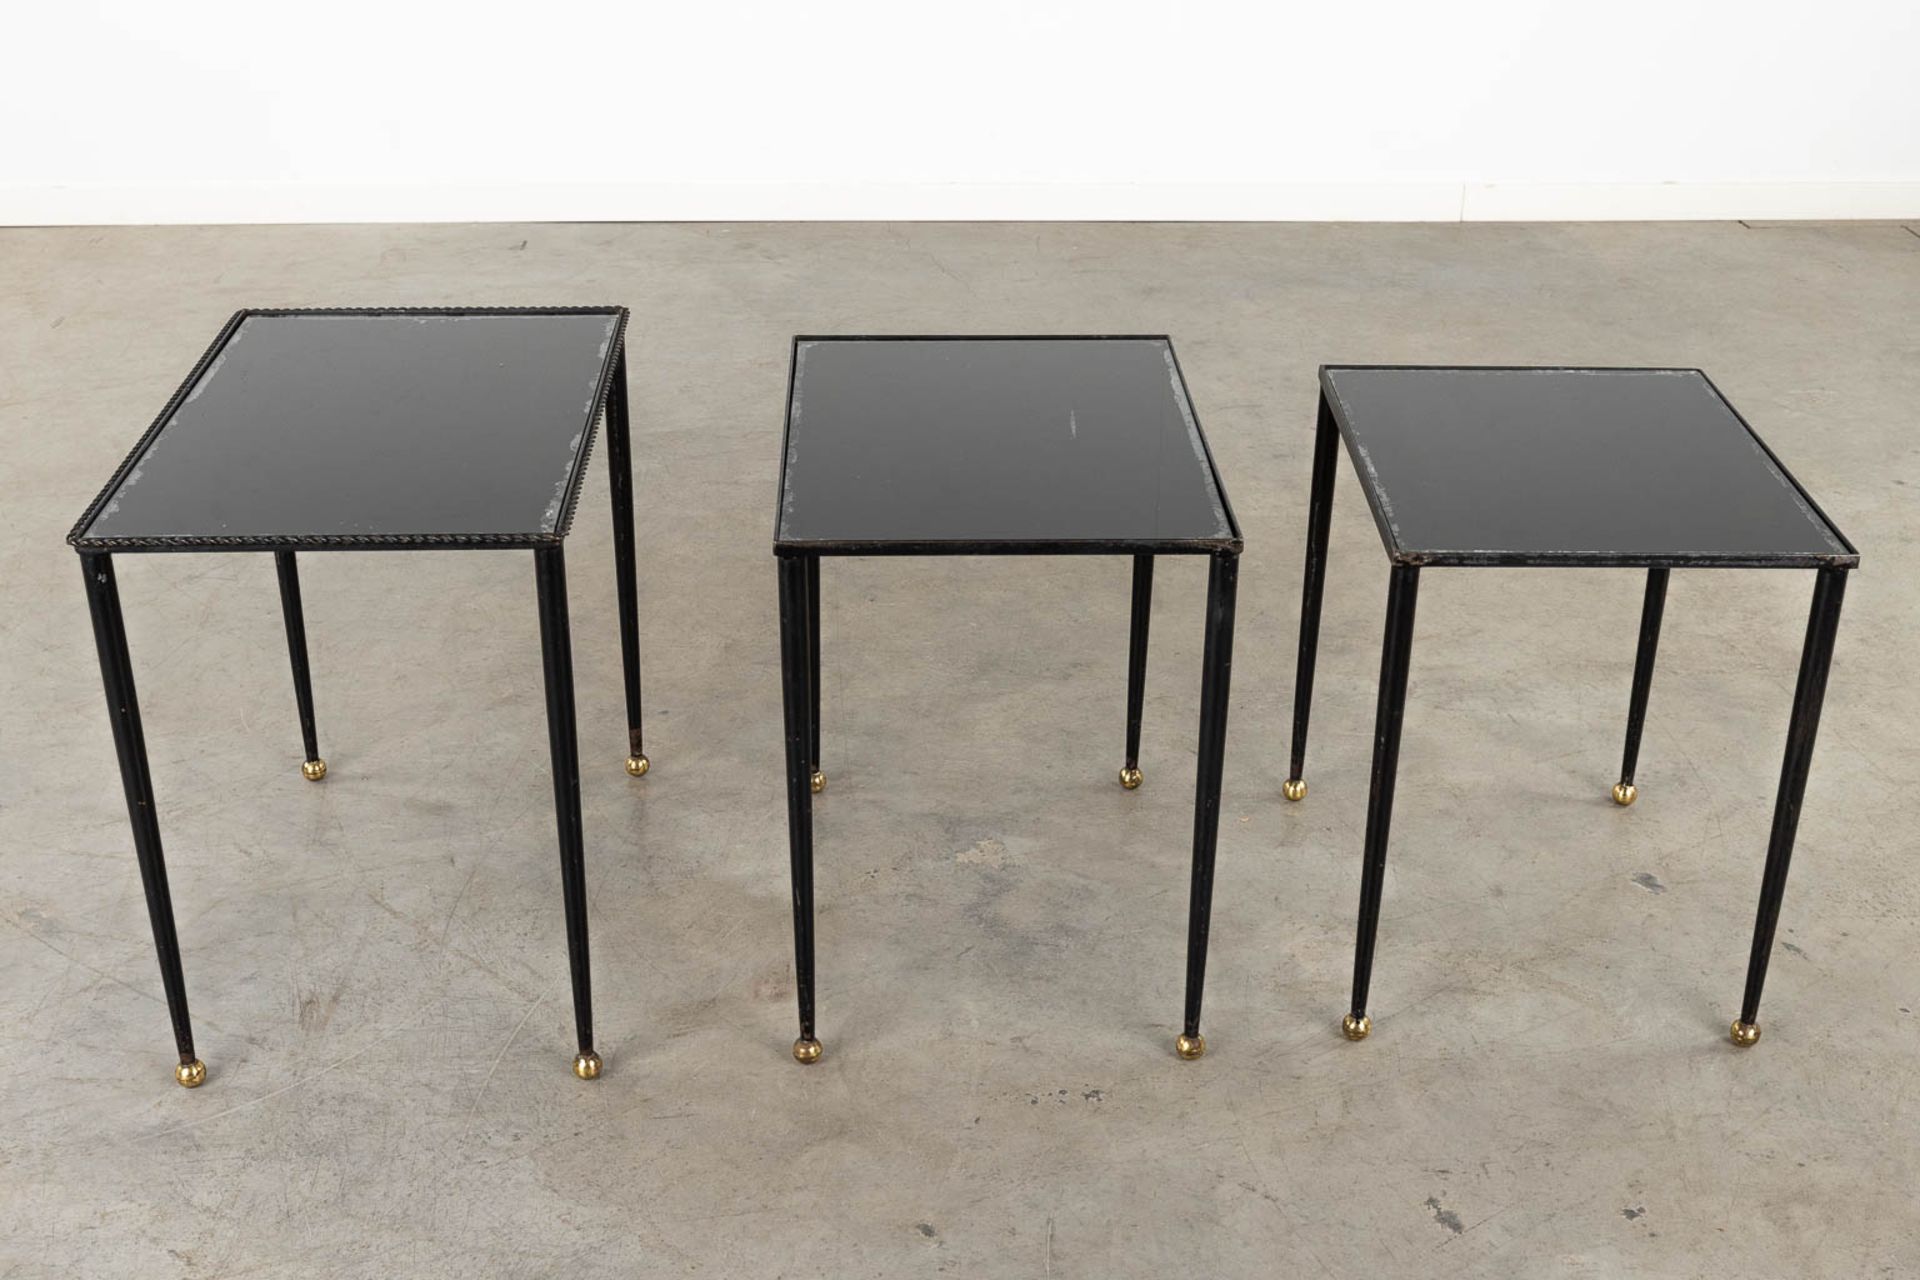 A set of Nesting tables, metal and black tinted glass. 20th C. (D:56 x W:37 x H:50 cm) - Image 7 of 10